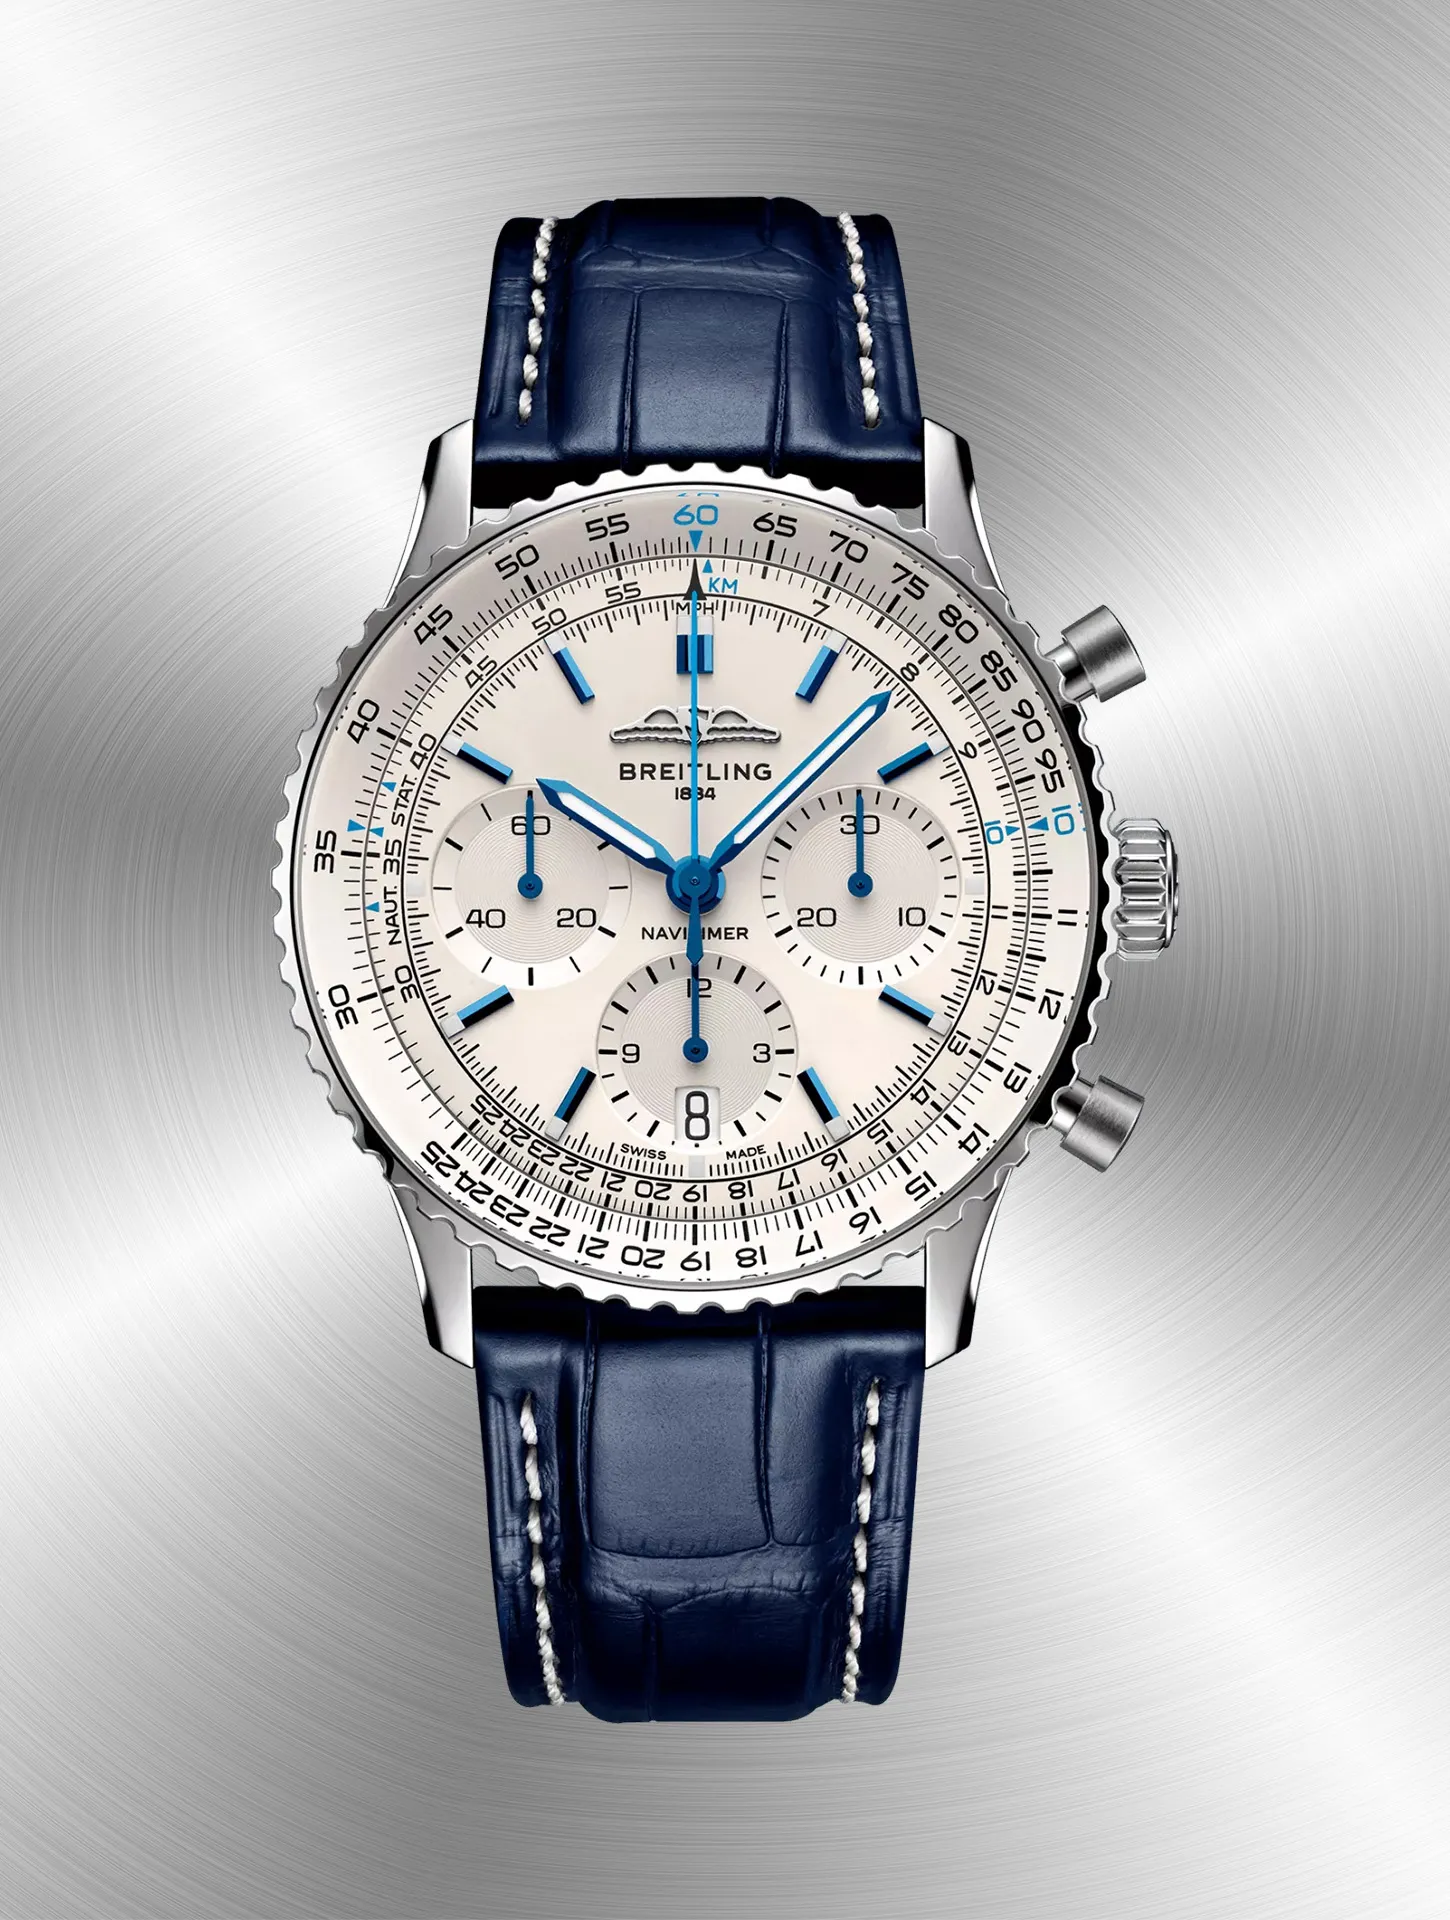 Introducing best Breitling replica watches with high quality